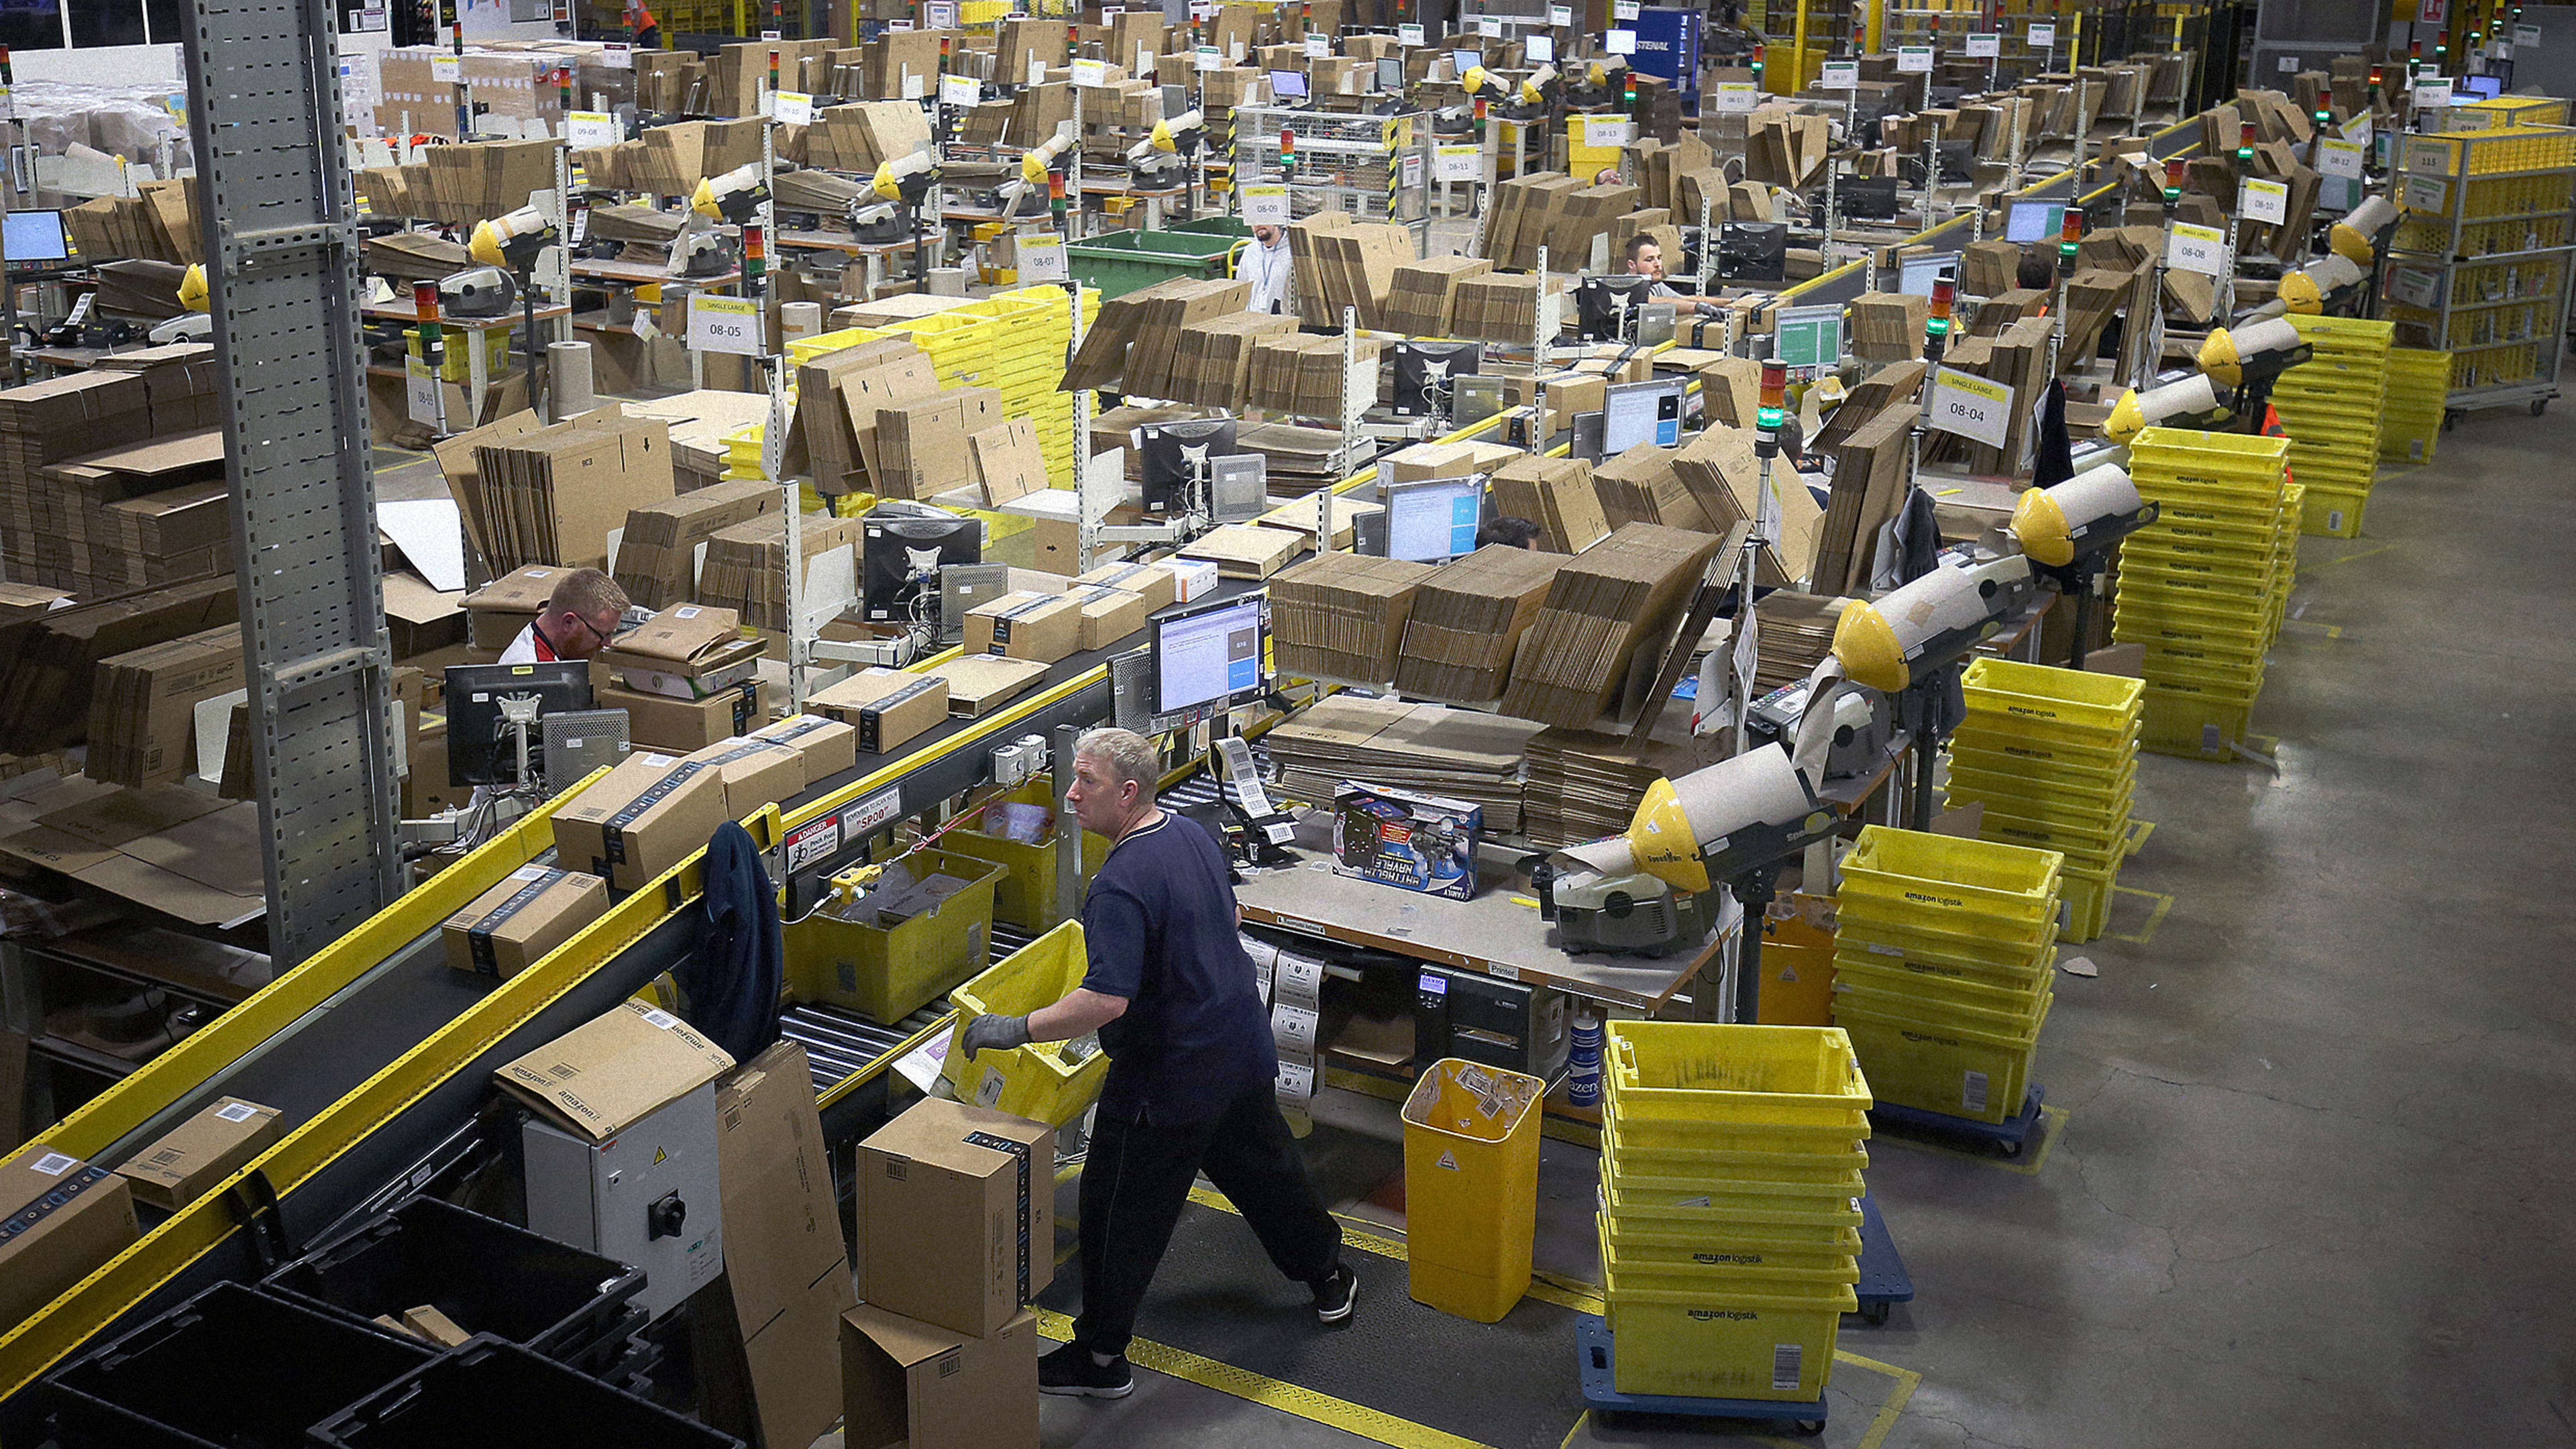 Fear inside Amazon warehouses as workers face sick colleagues and mandatory overtime